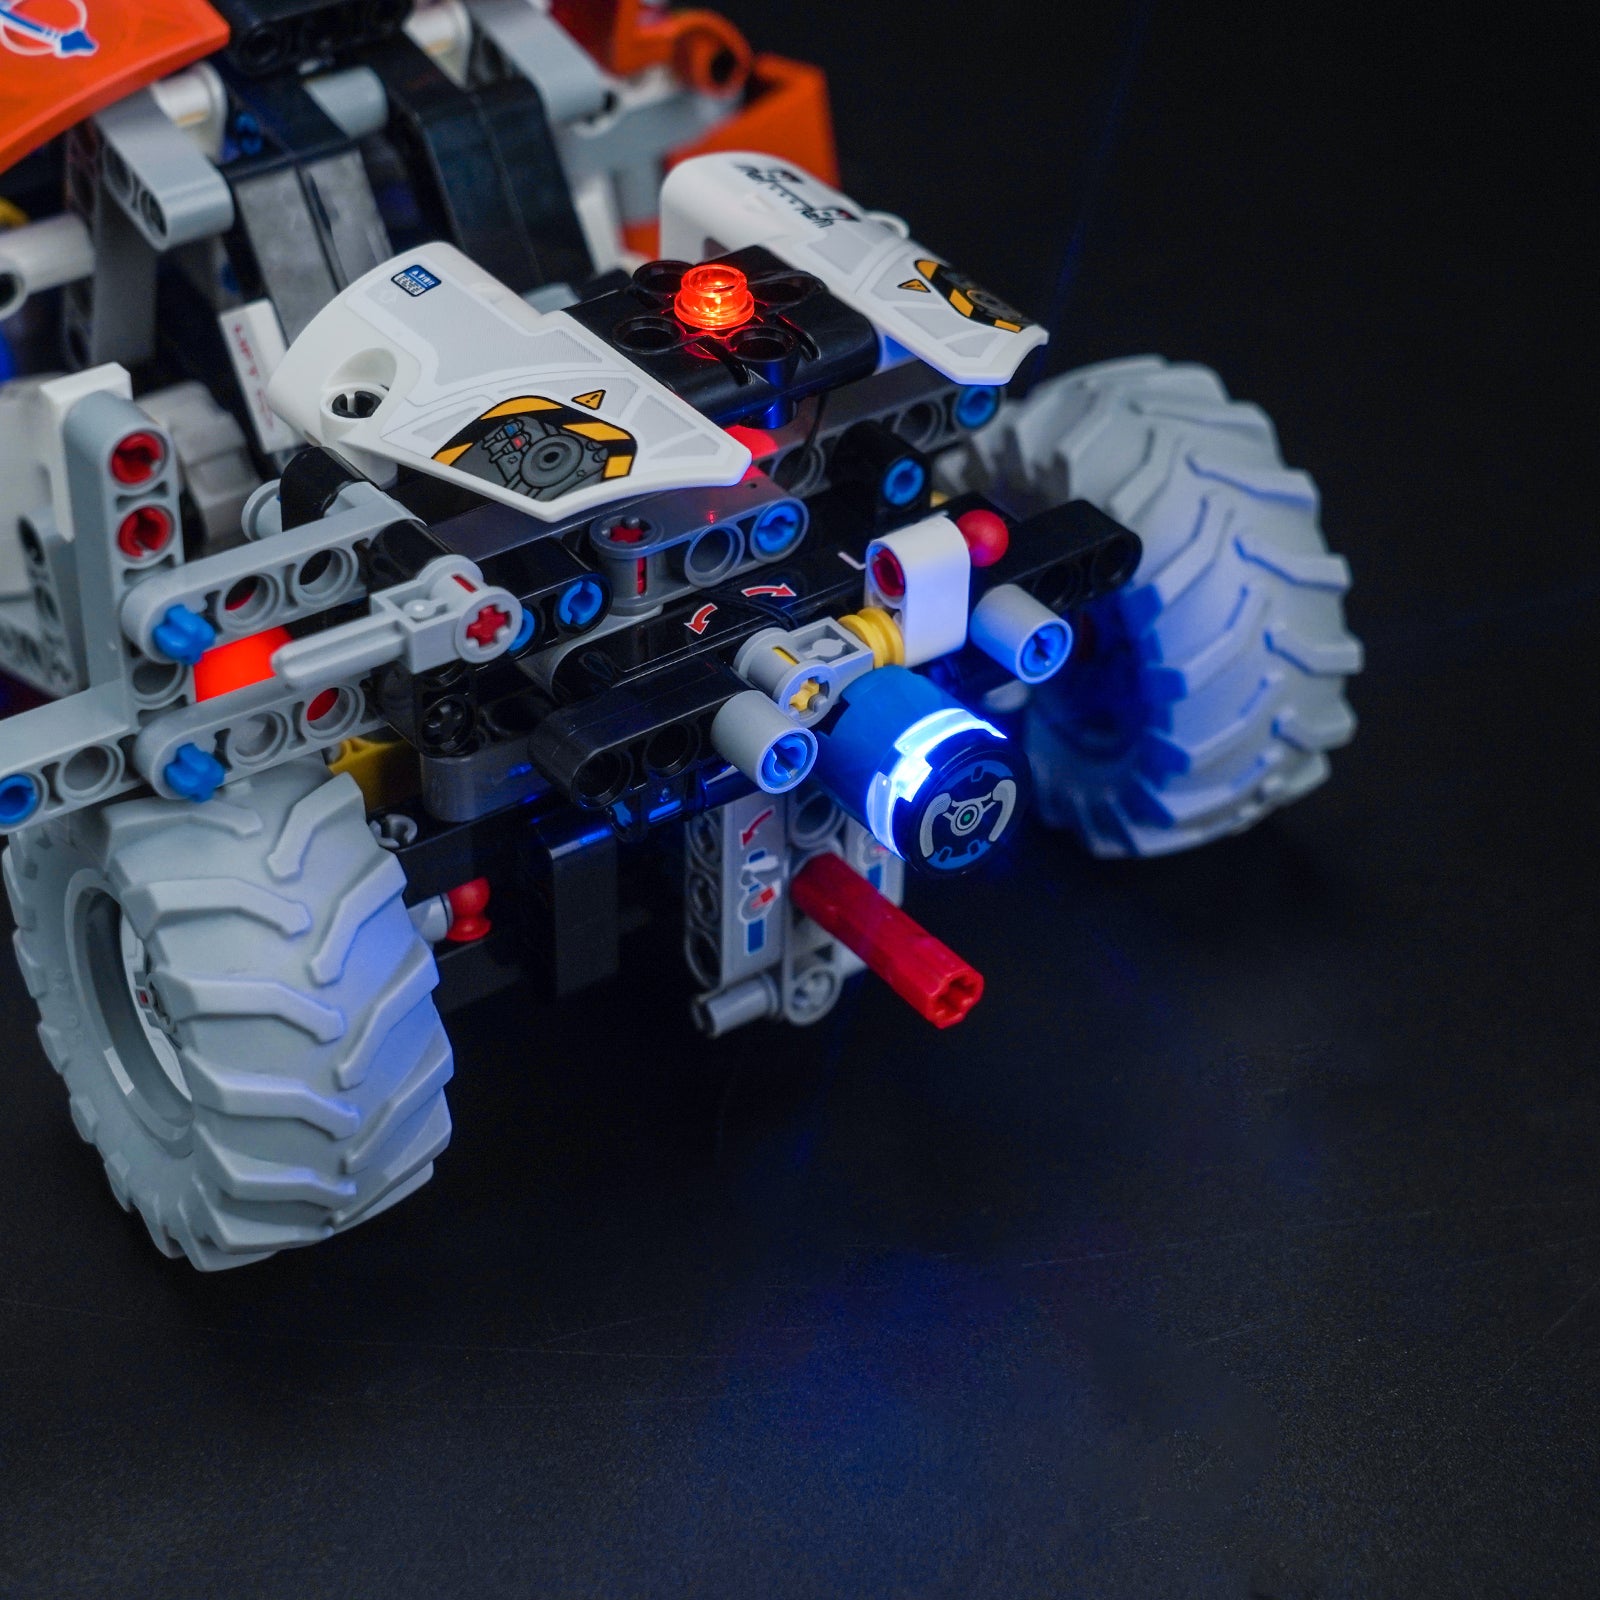 Lighting effects detail showcase designed for the LEGO Technic Surface Space Loader LT78 42178